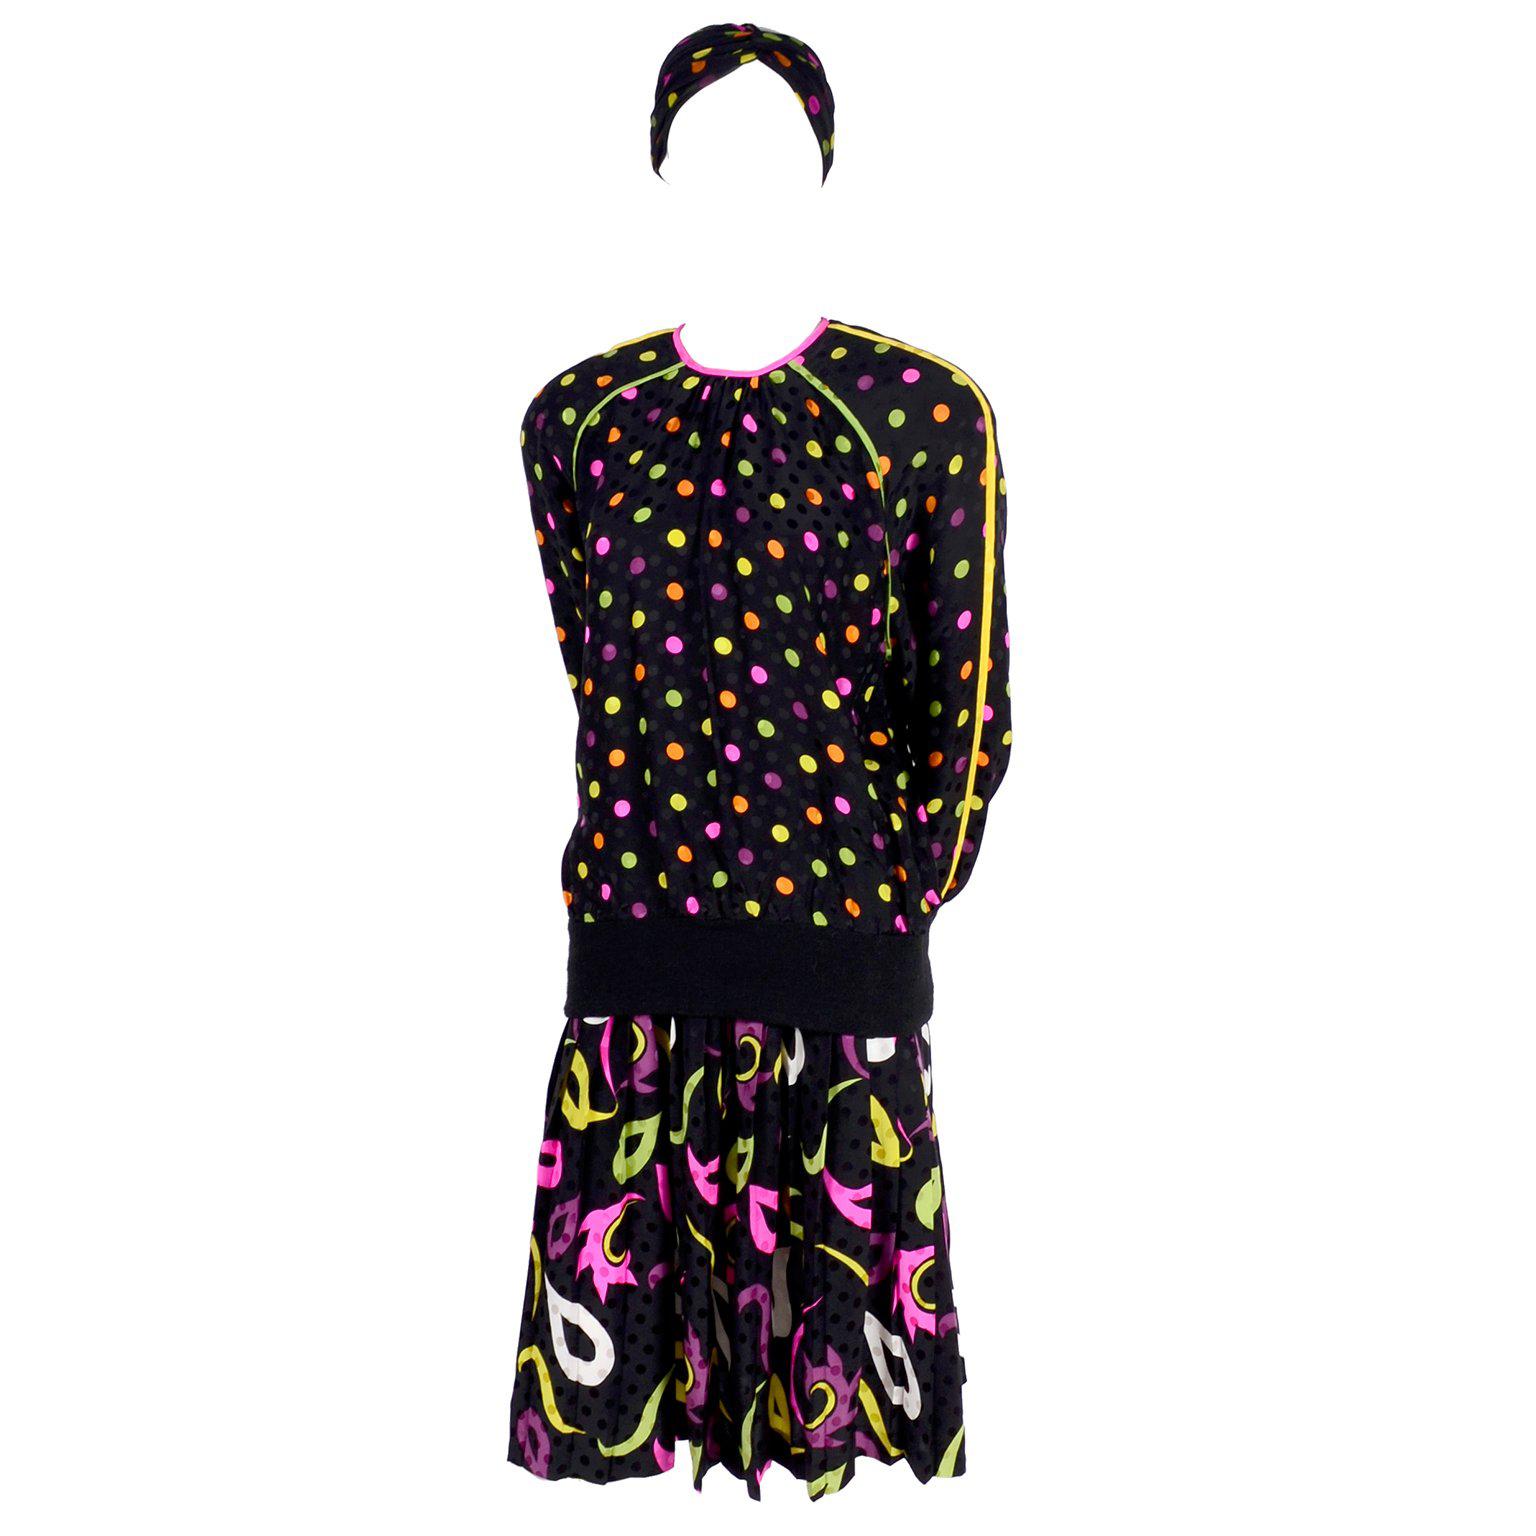 Julie Francis 1980s Silk Dress in Polka Dot Abstract Paisley Pattern Mix & Scarf